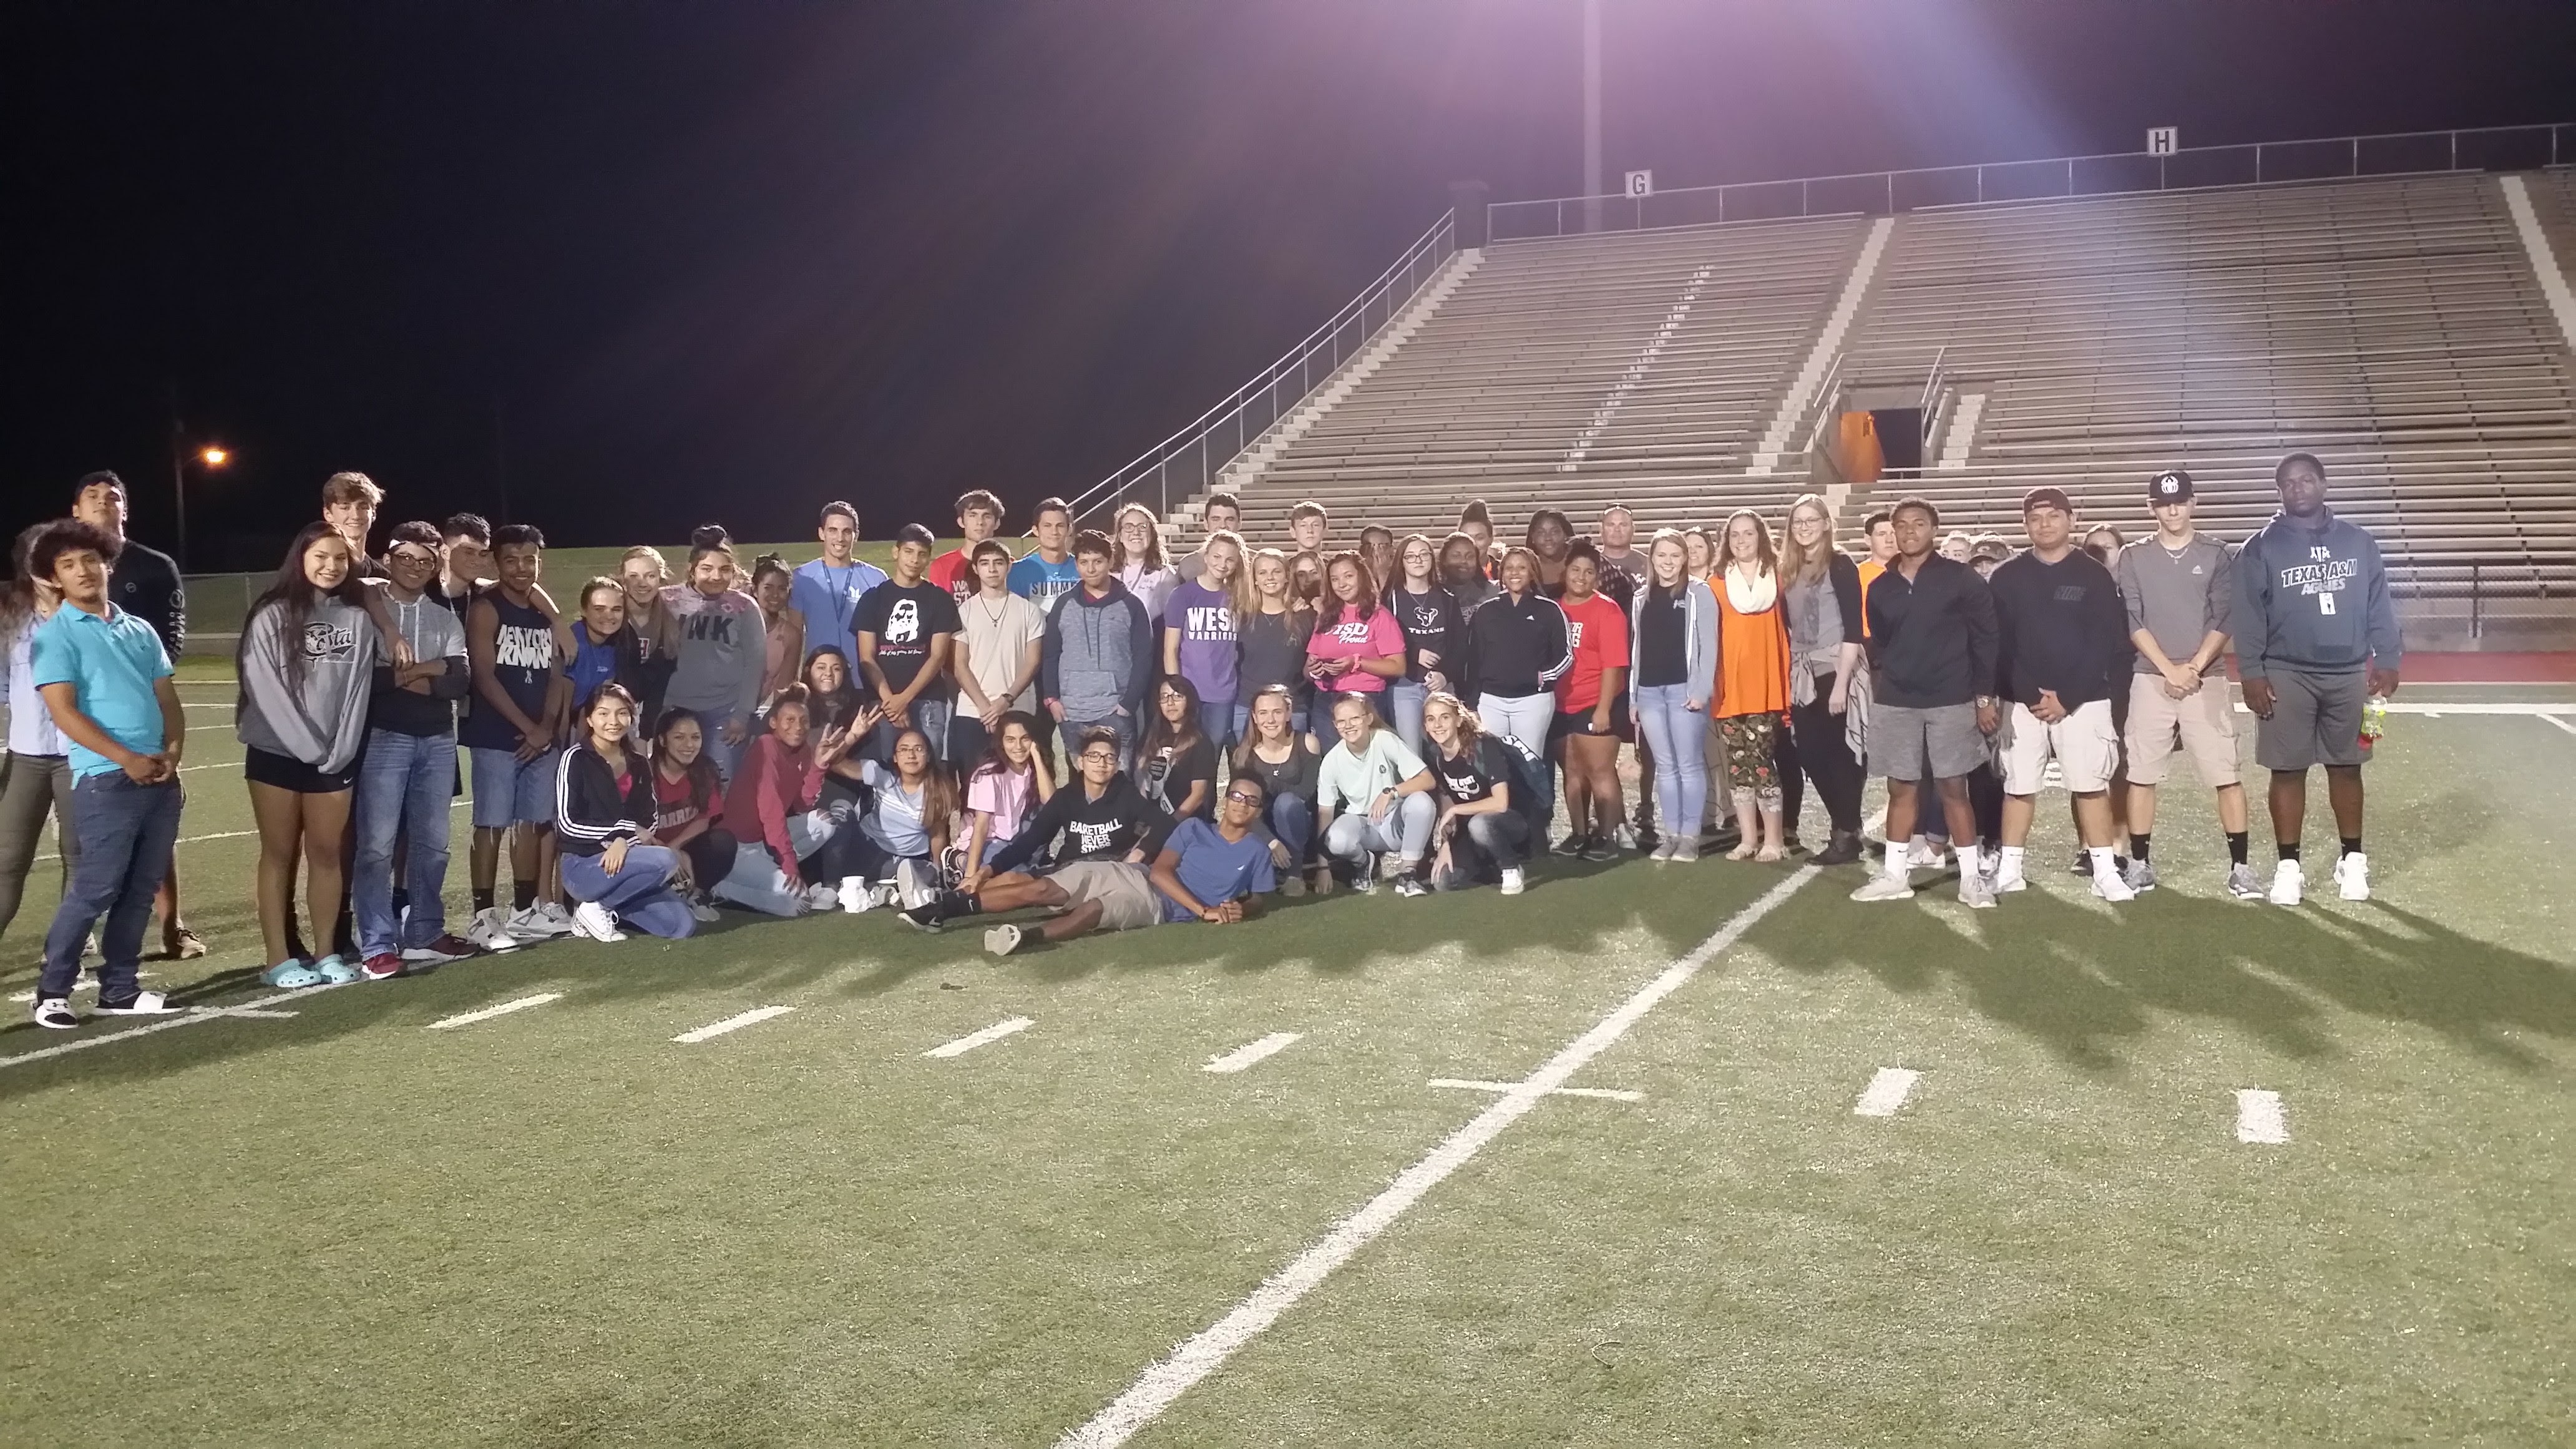 Group picture on the football field